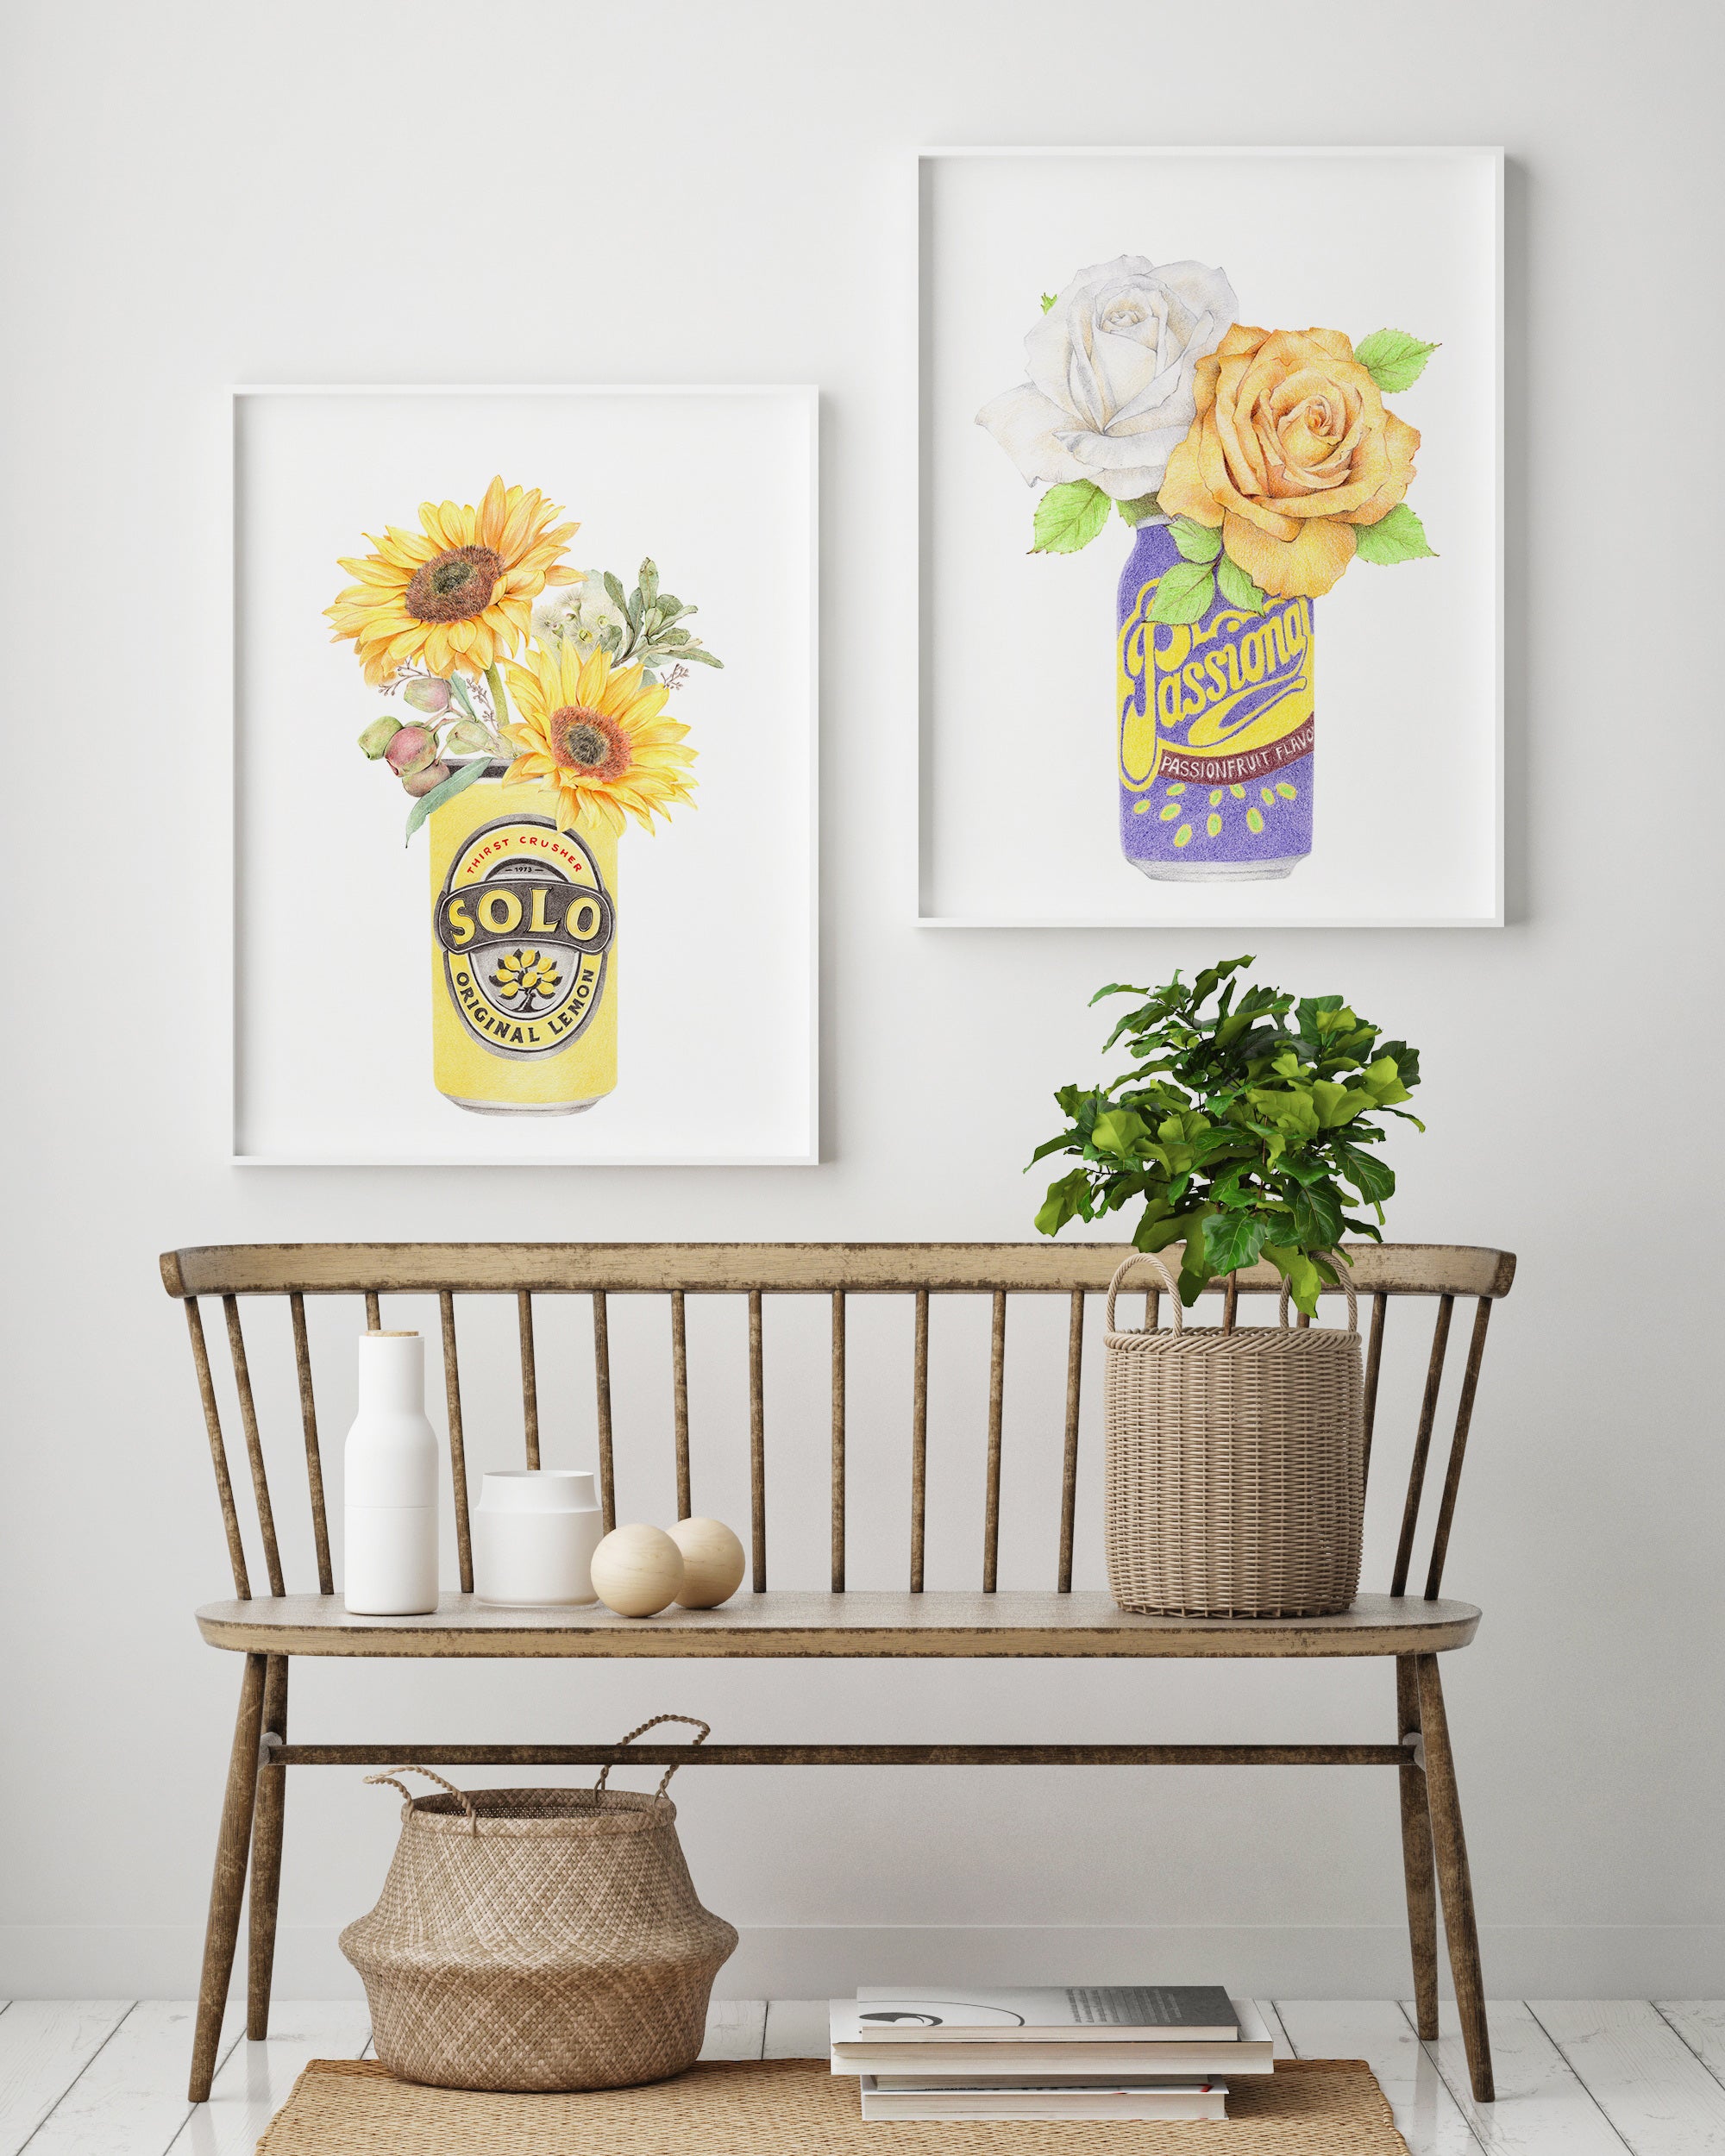 Australian botanical prints featuring Solo and Passiona